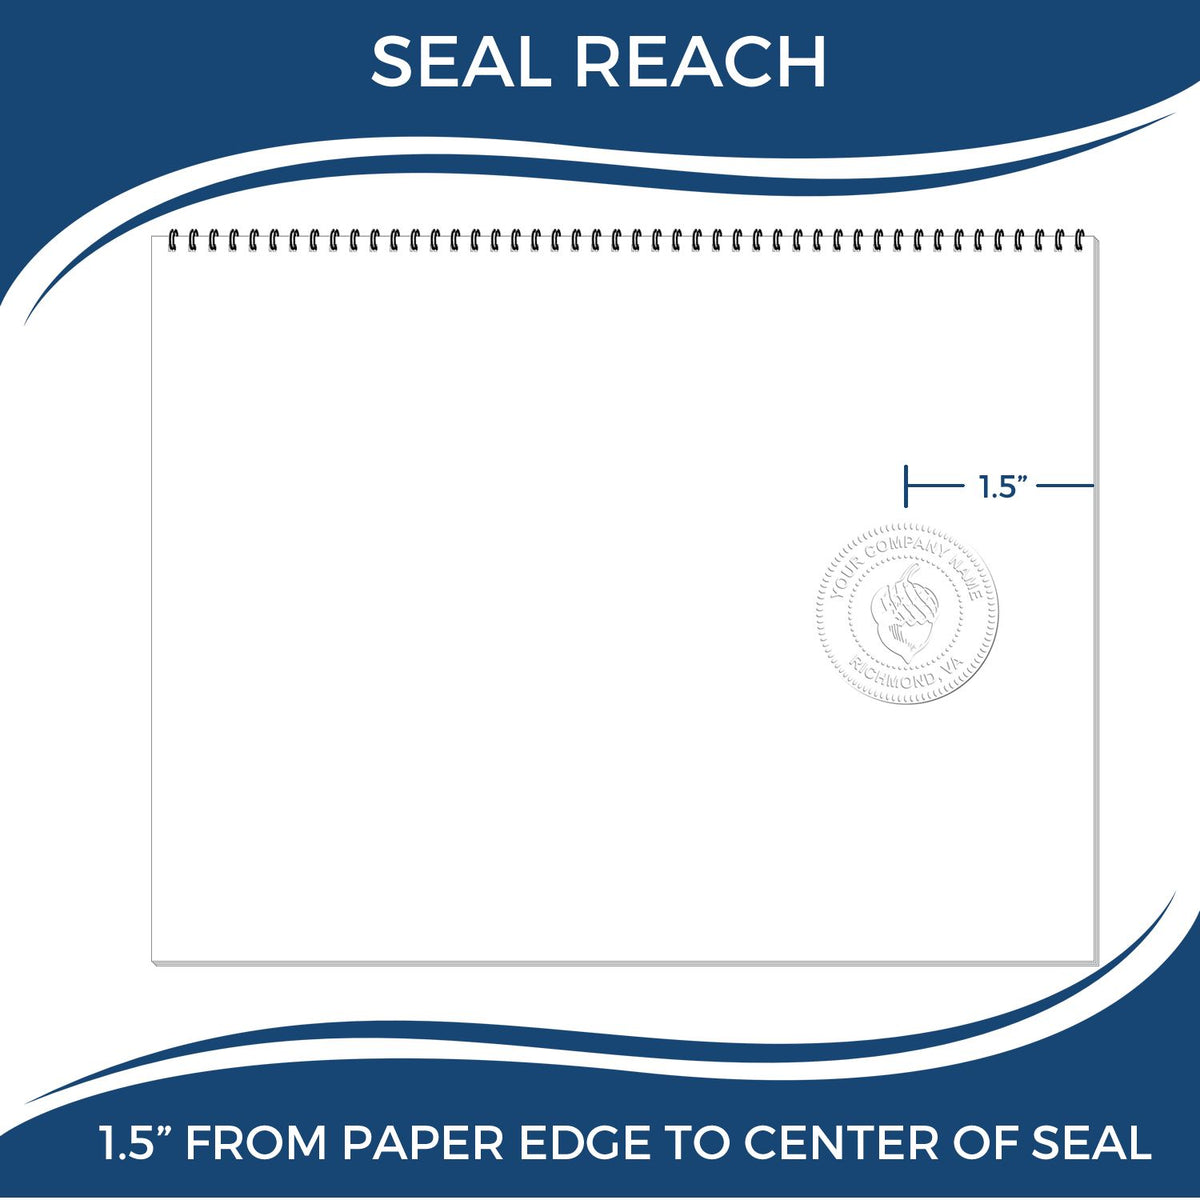 An infographic showing the seal reach which is represented by a ruler and a miniature seal image of the Hybrid Tennessee Geologist Seal